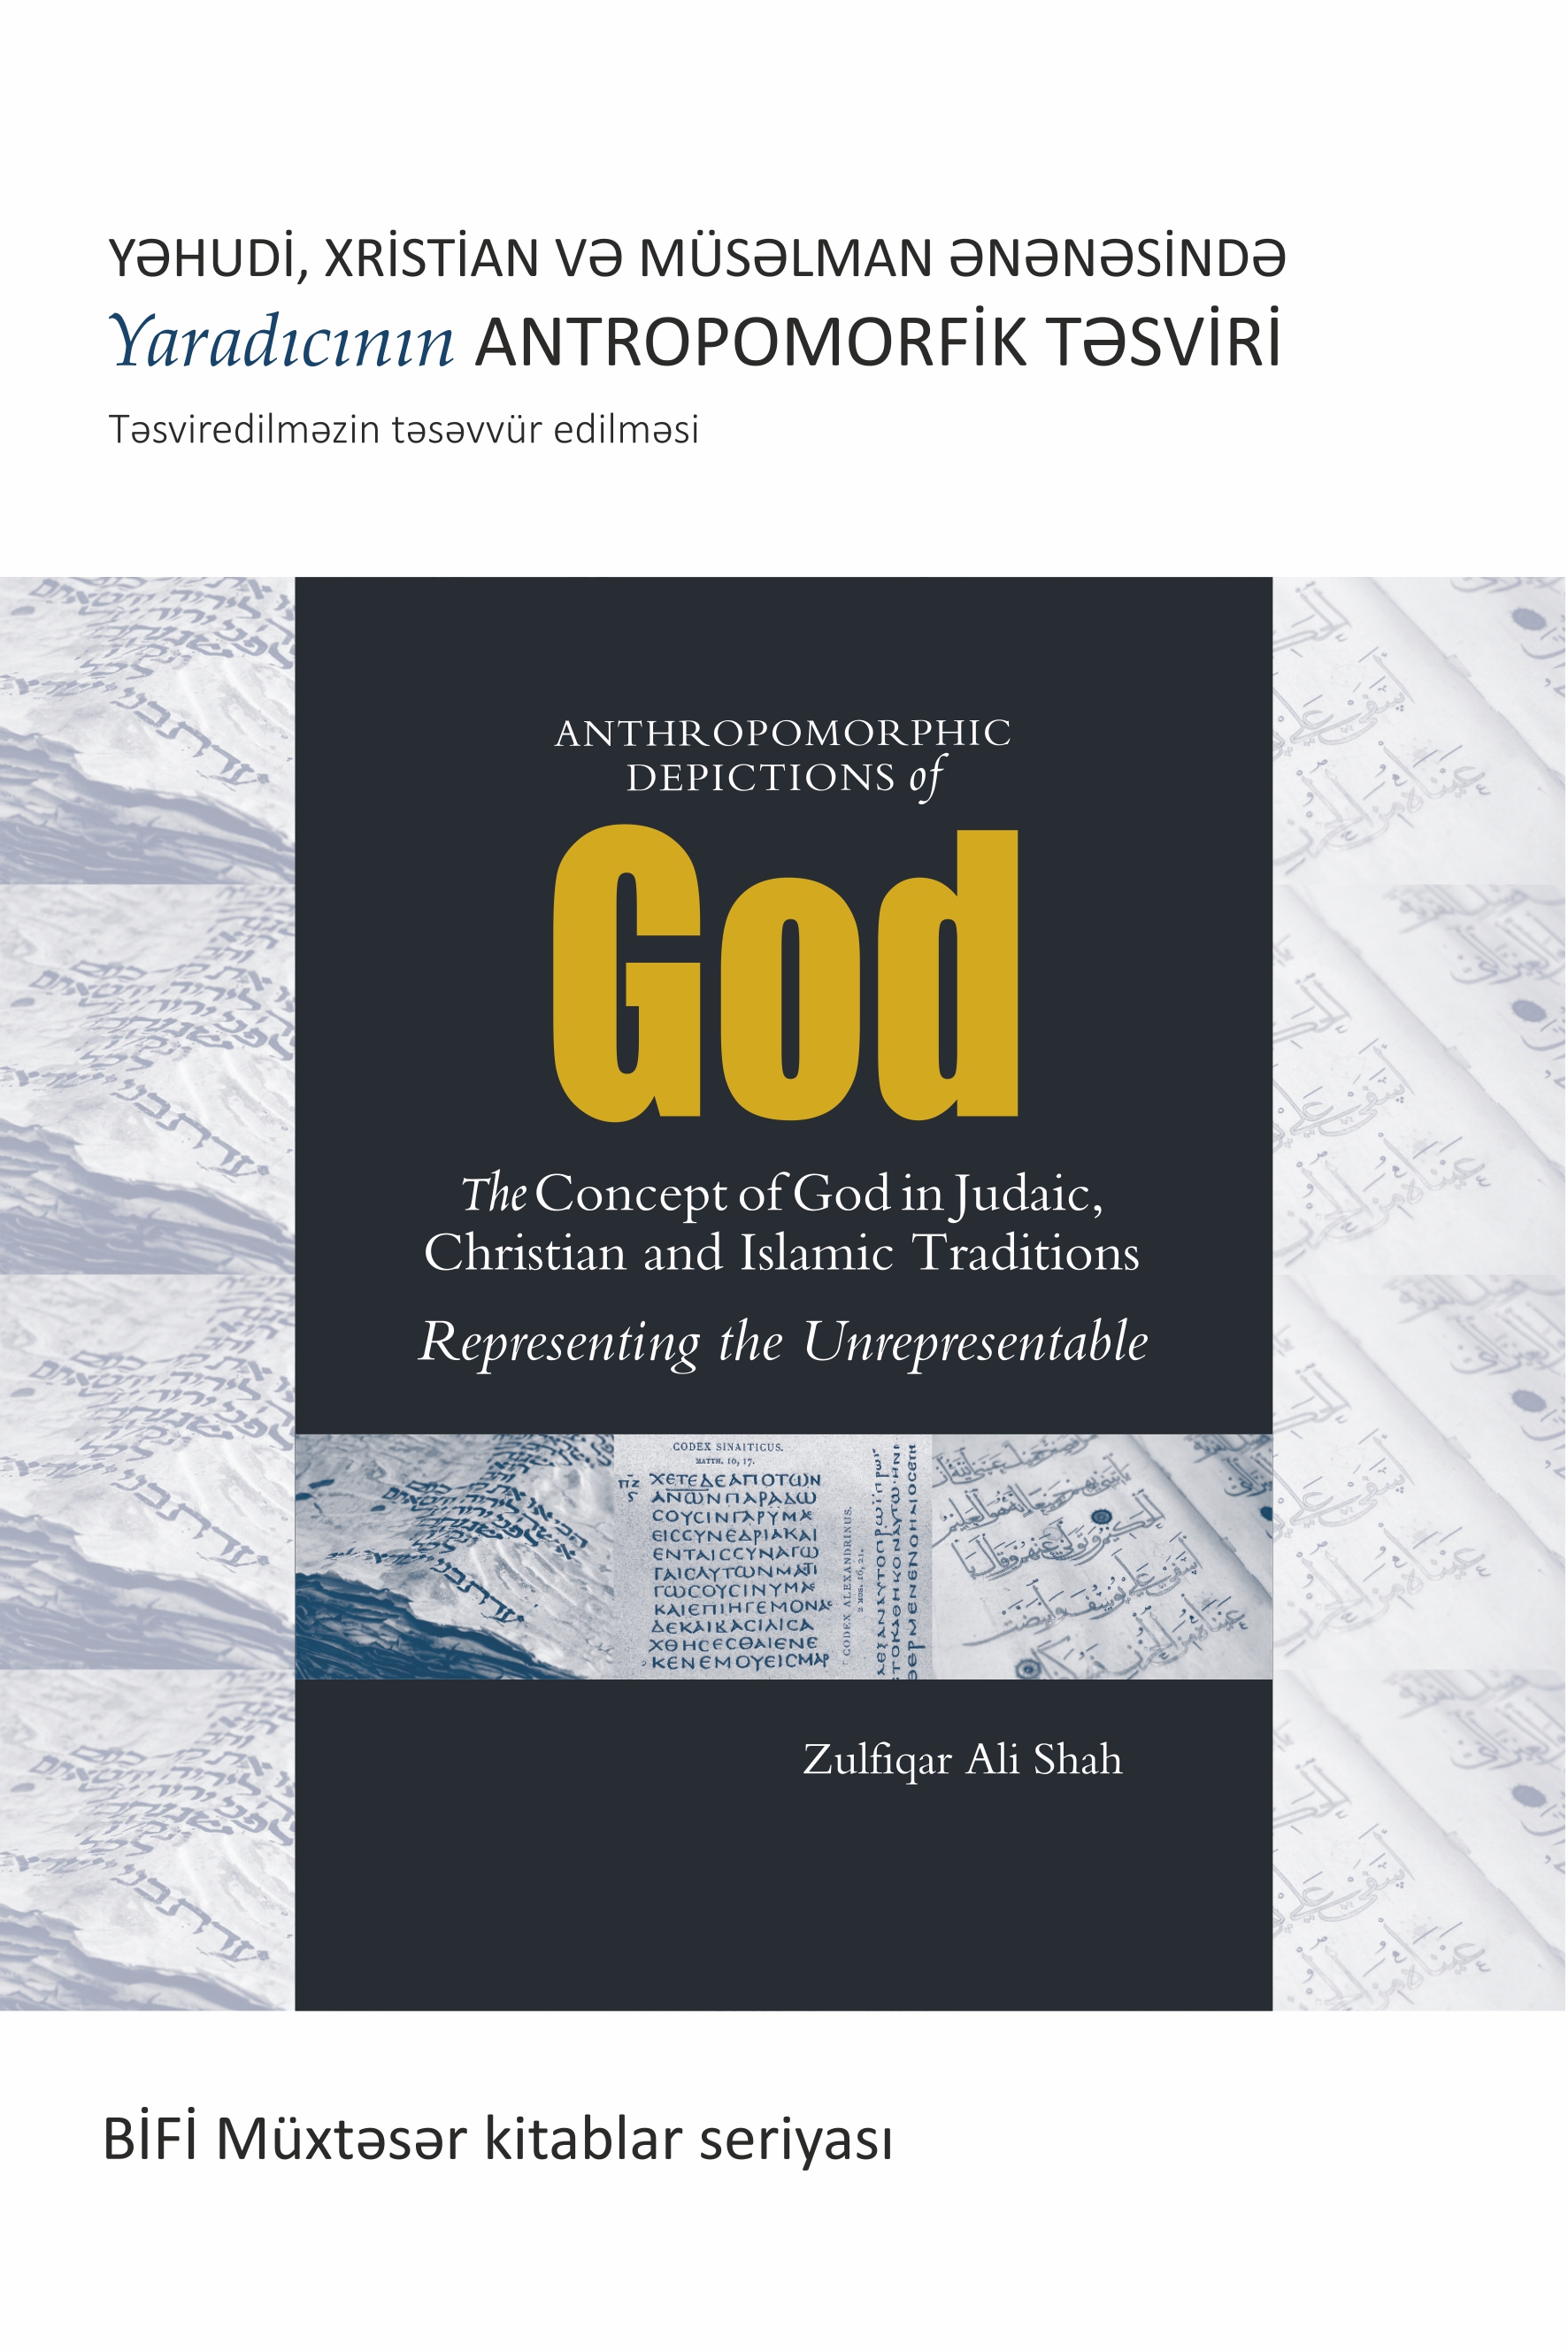 Azeri - Books-In-Brief - Anthropomorphic Depictions of God: The Concept of God in Judaic, Christian, and Islamic Traditions: Representing the Unrepresentable